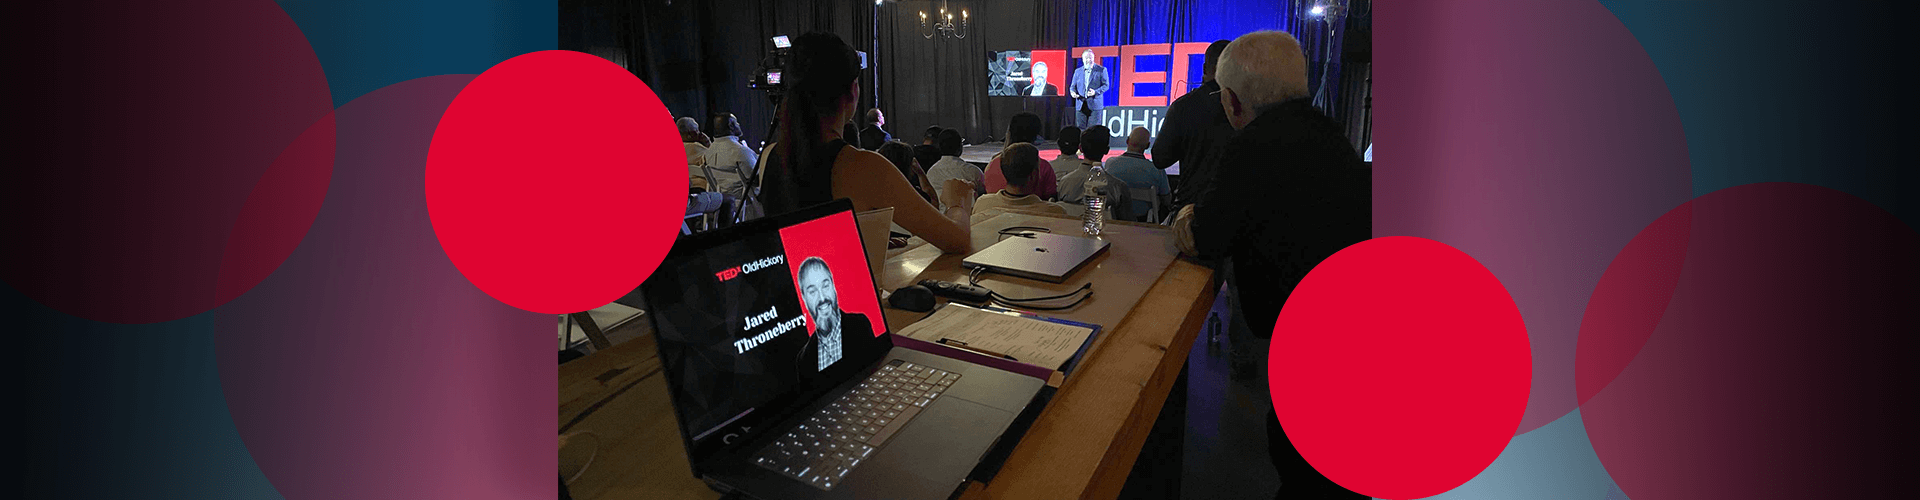 TEDx event with man speaking onstage while audience watches and laptop and notes open on table